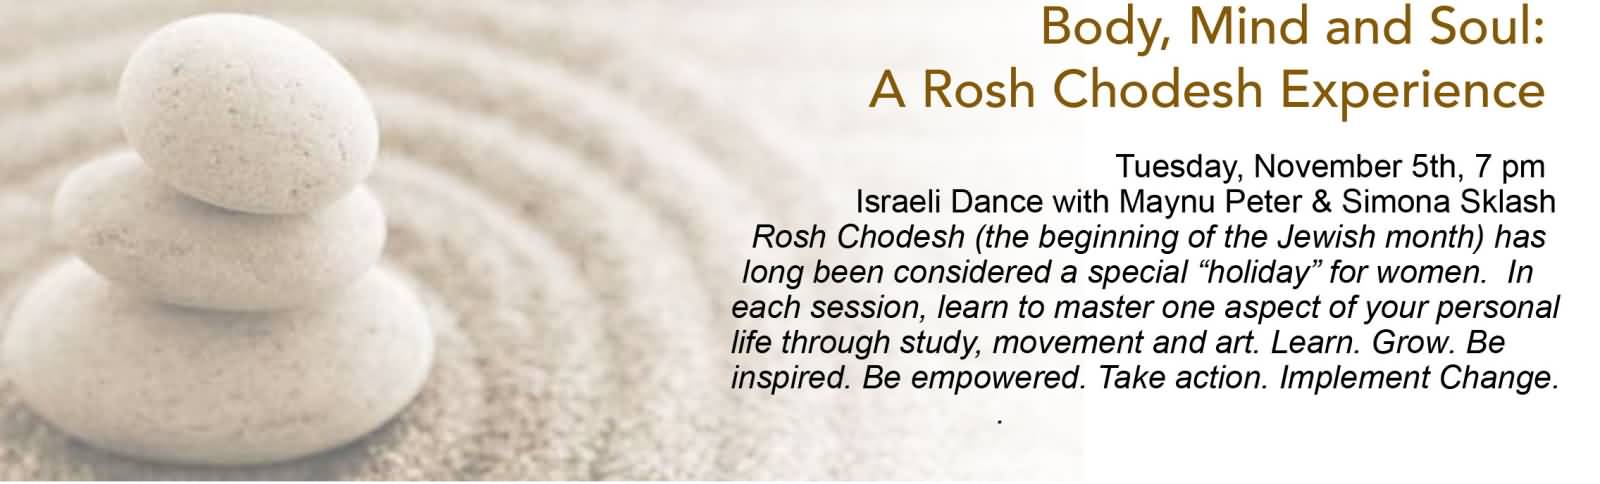 Body, Mind And Soul A Rosh Chodesh Experience